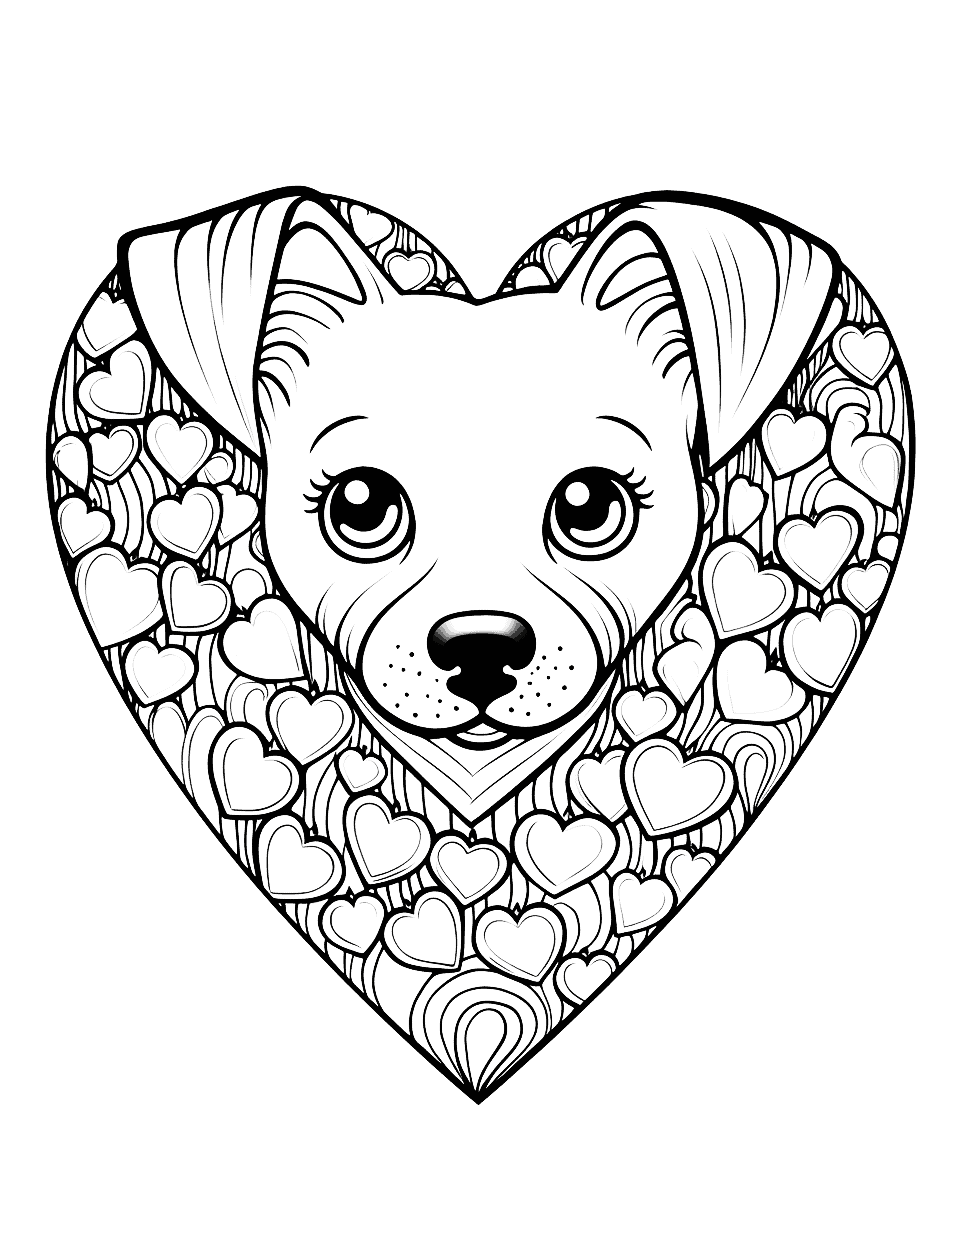 Puppy Love Heart Coloring Page - A cute puppy surrounded by hearts.